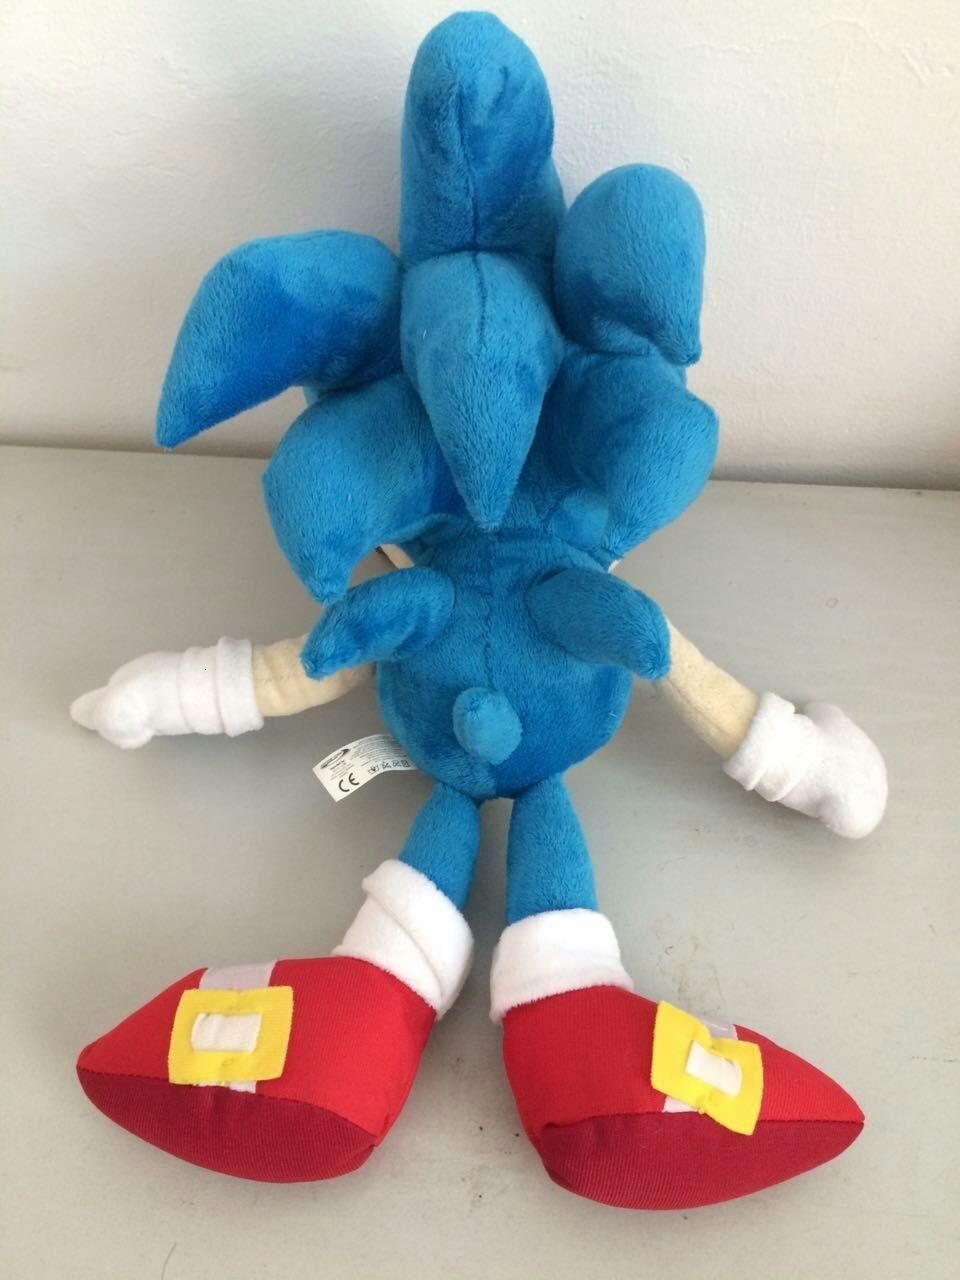 Anime Doll Jouets Peluche Sonic The Hedgehog 40 cm Bleu Sonic jouets en peluche mignon en peluche 